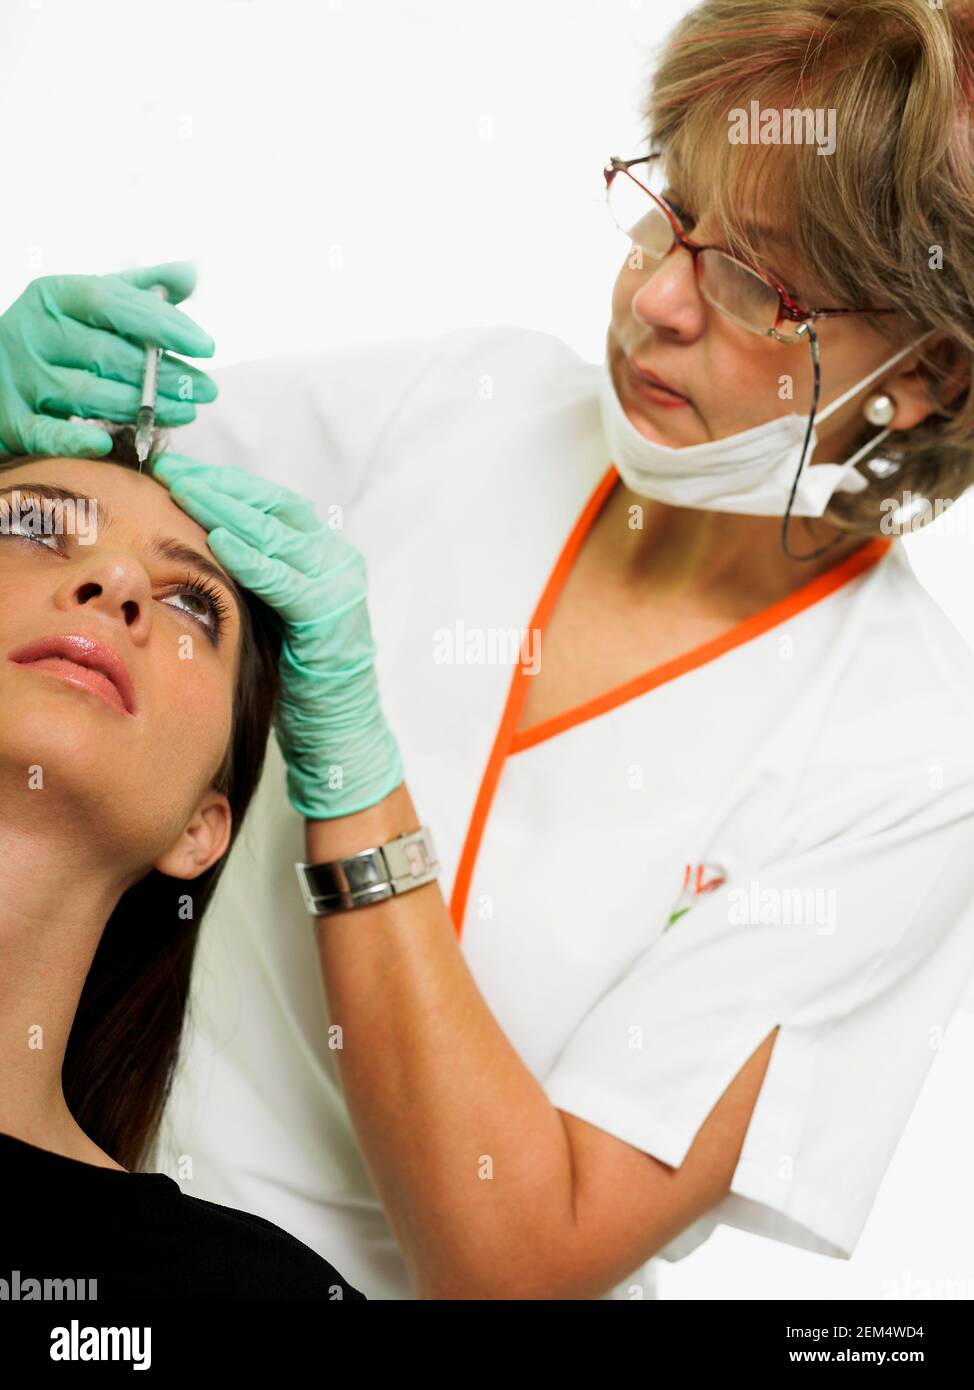 Close-up of a mid adult woman getting a botox injection on her face Stock Photo